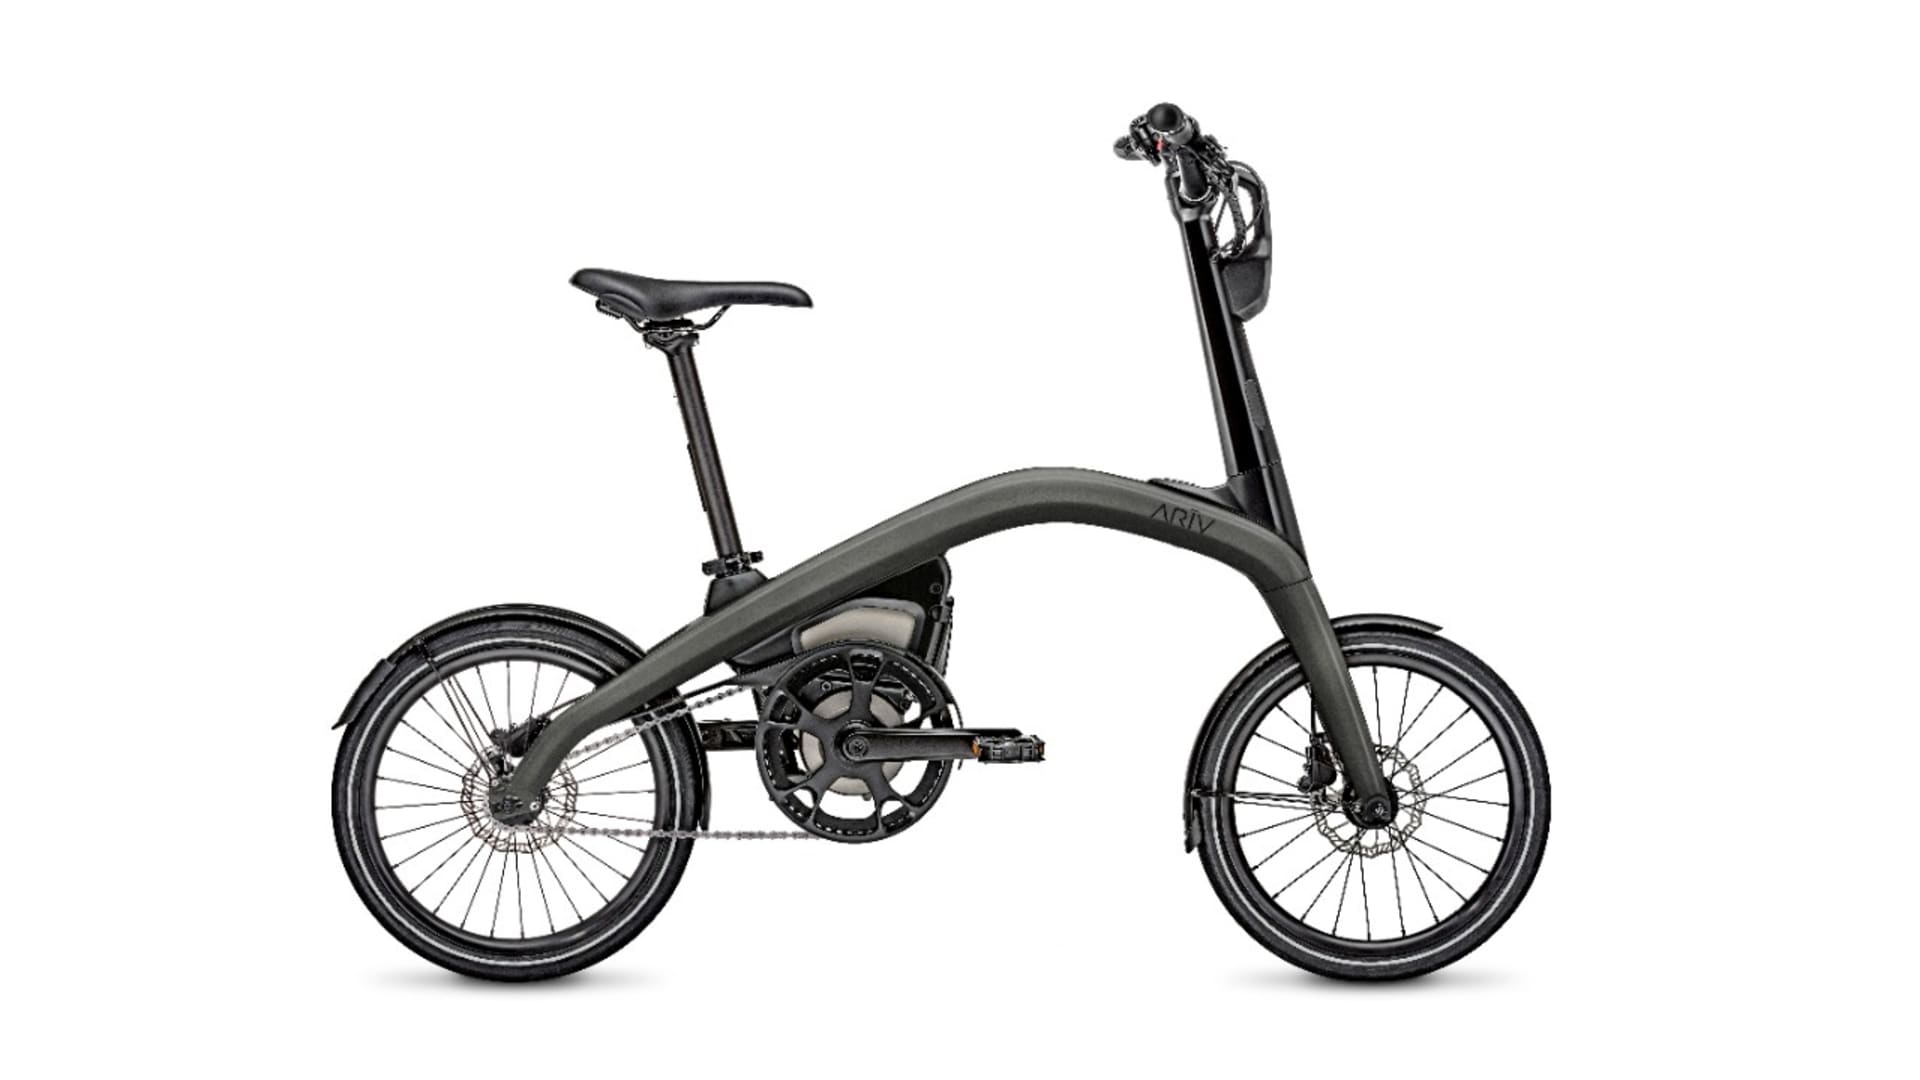 The ARĪV Meld compact eBike from General Motors